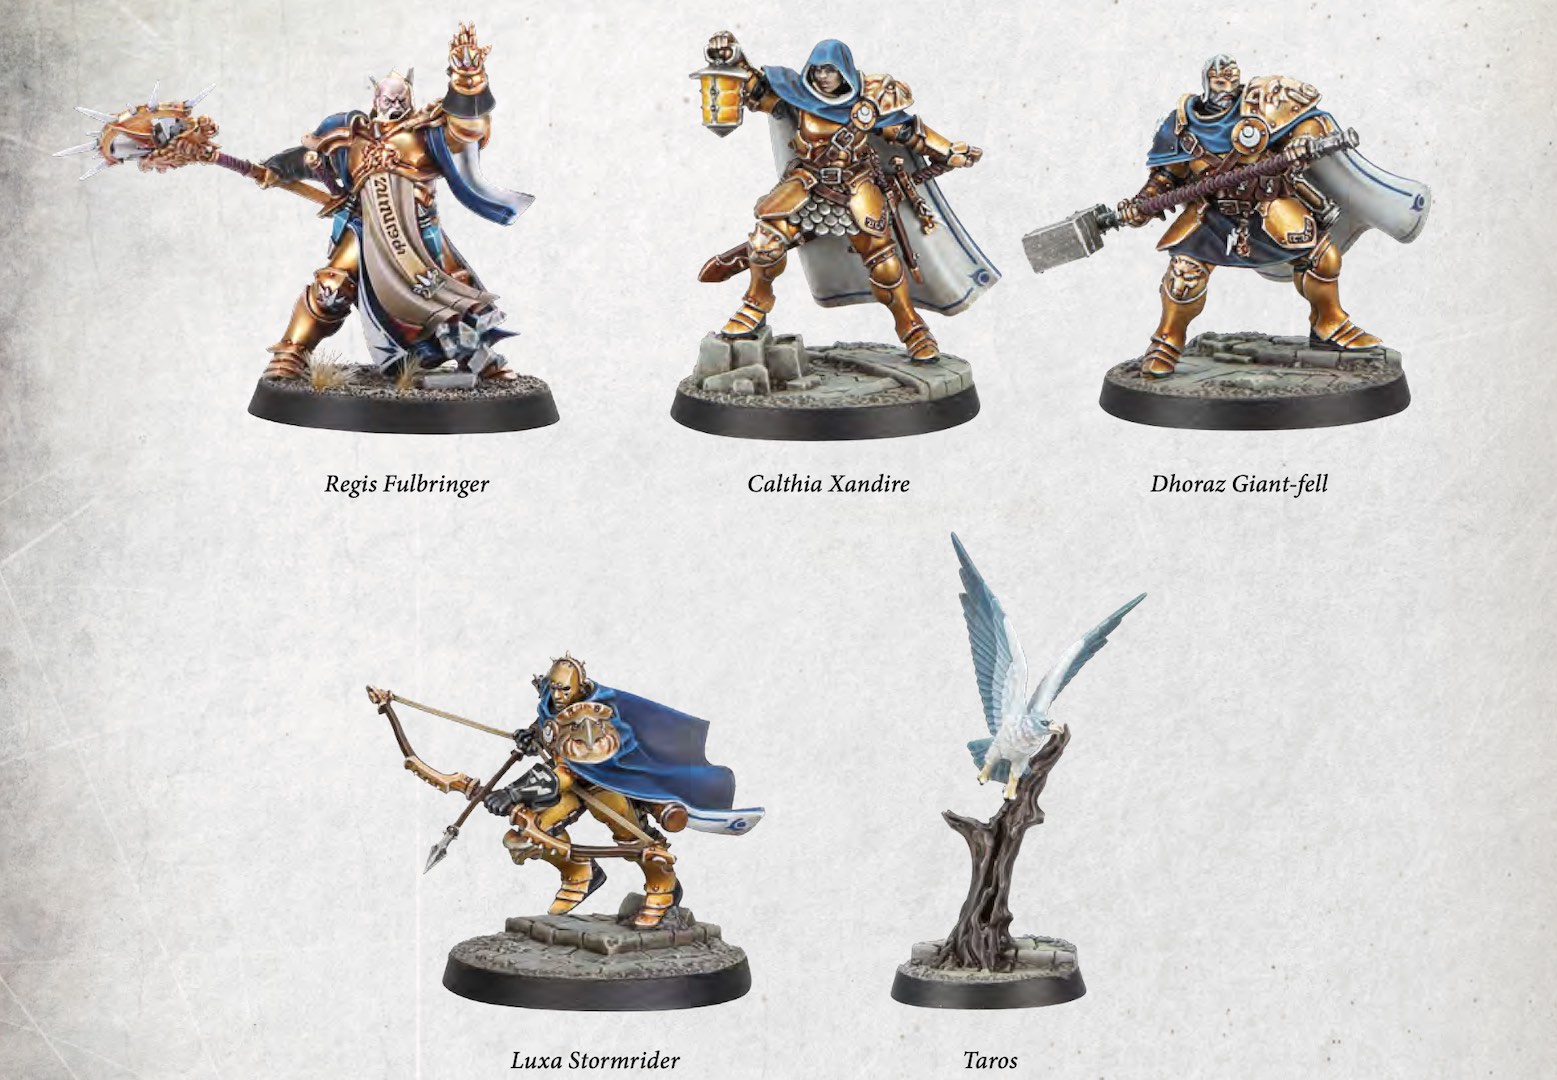 Miniatures included (unassembled and unpainted) in the Warhammer Board Game Warhammer Quest